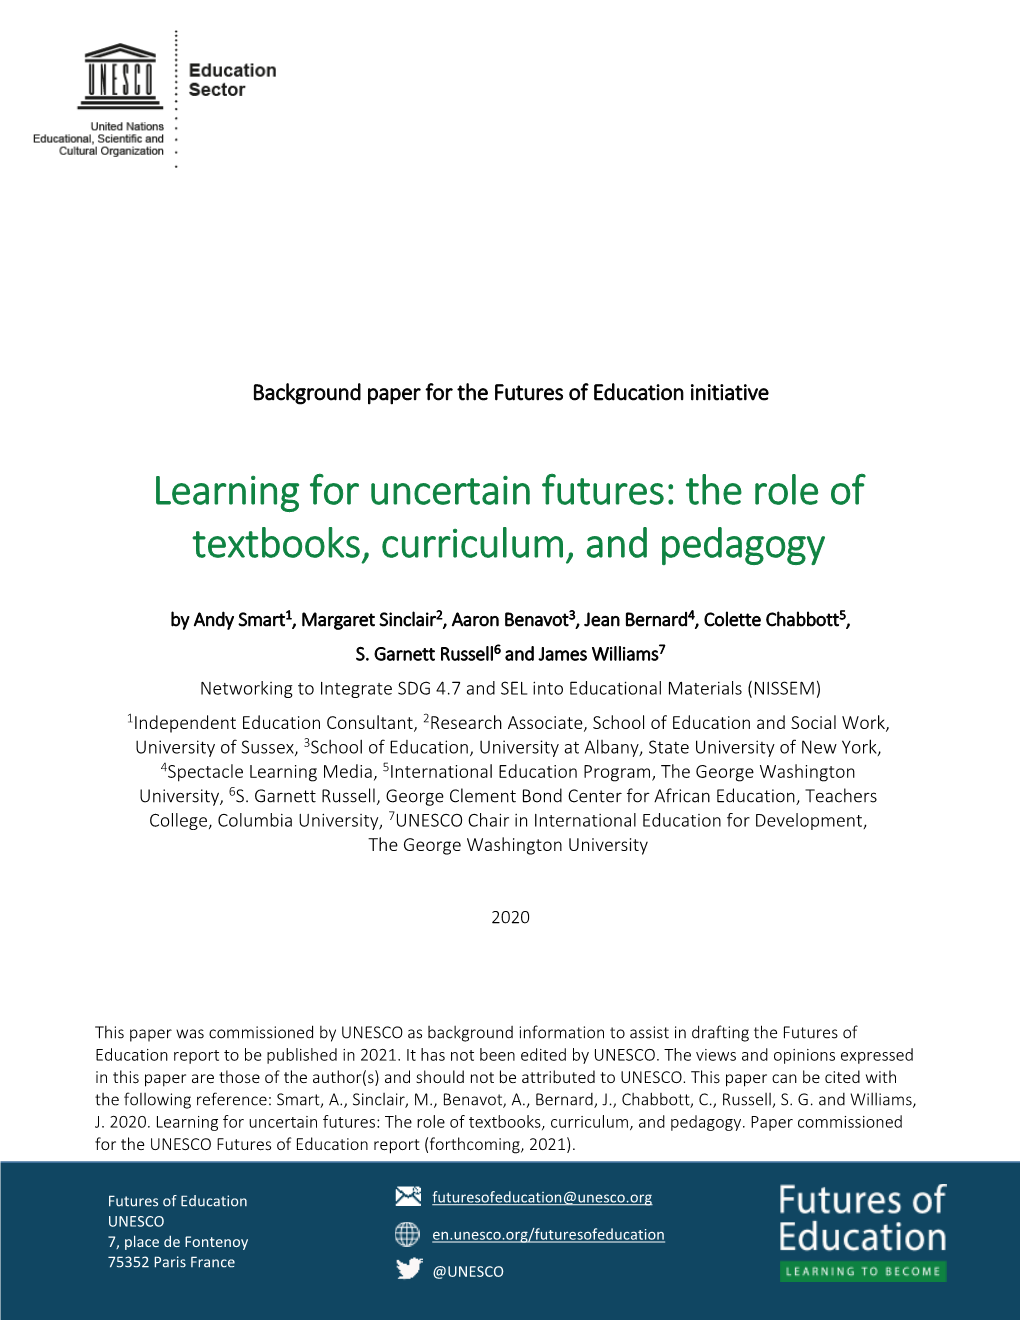 Learning for Uncertain Futures: the Role of Textbooks, Curriculum, and Pedagogy